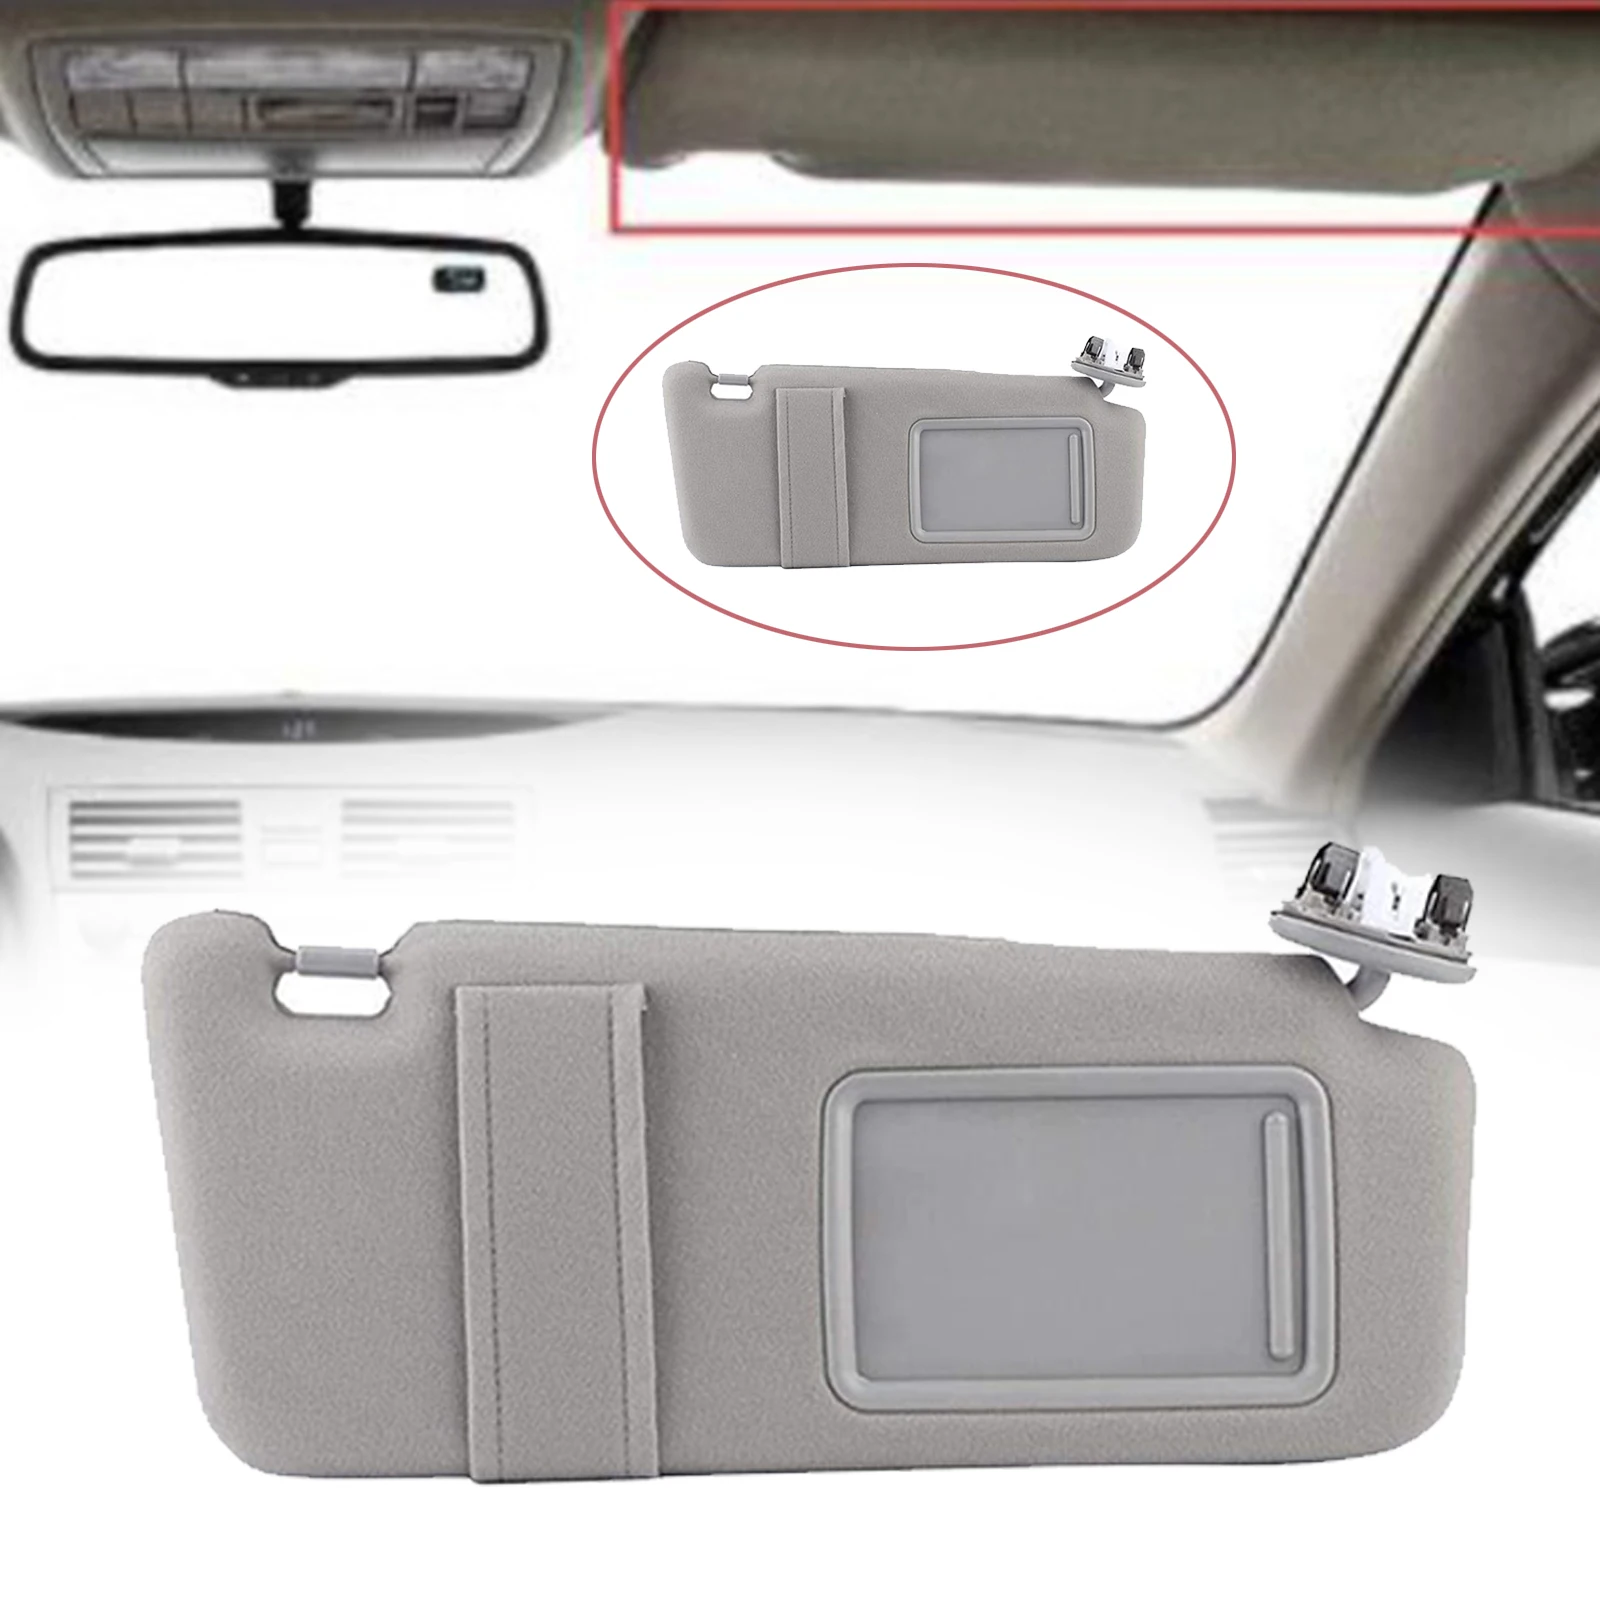 Sun Visor Compatible for Toyota Camry 2007 2008 2009 2010 2011